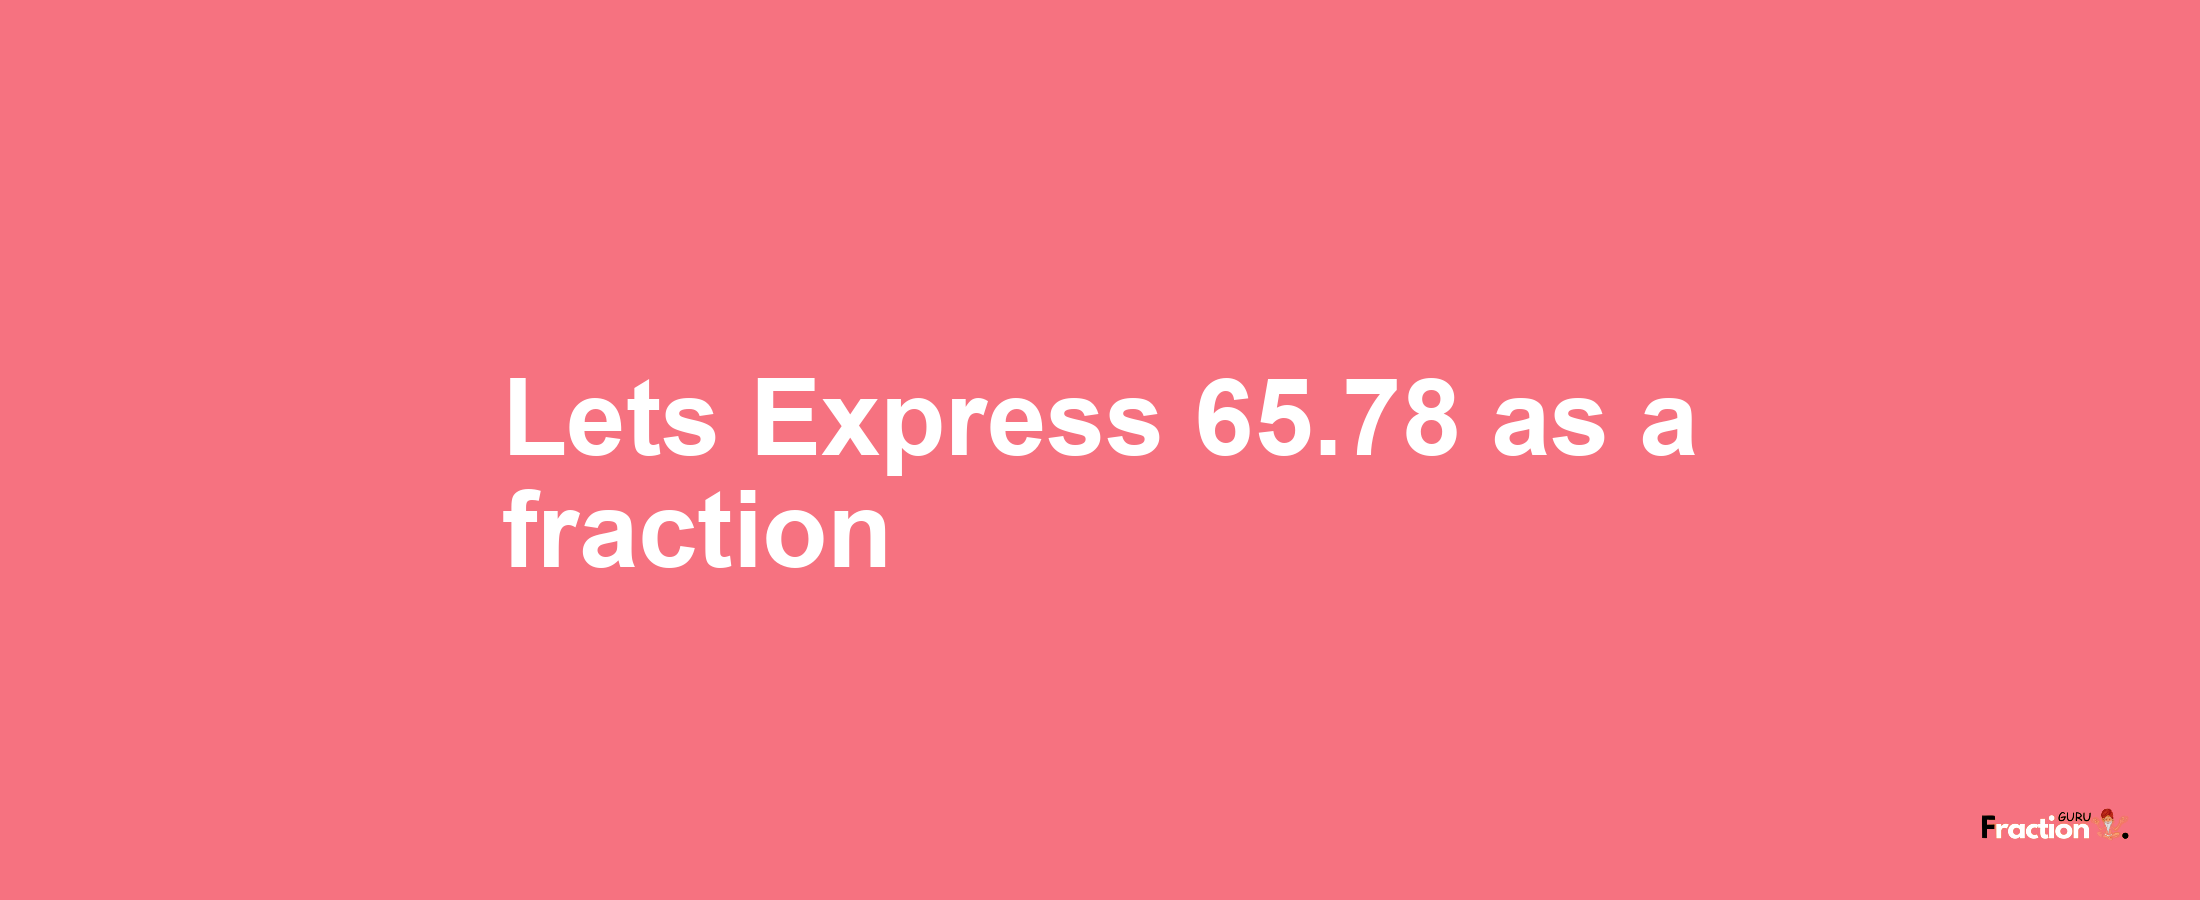 Lets Express 65.78 as afraction